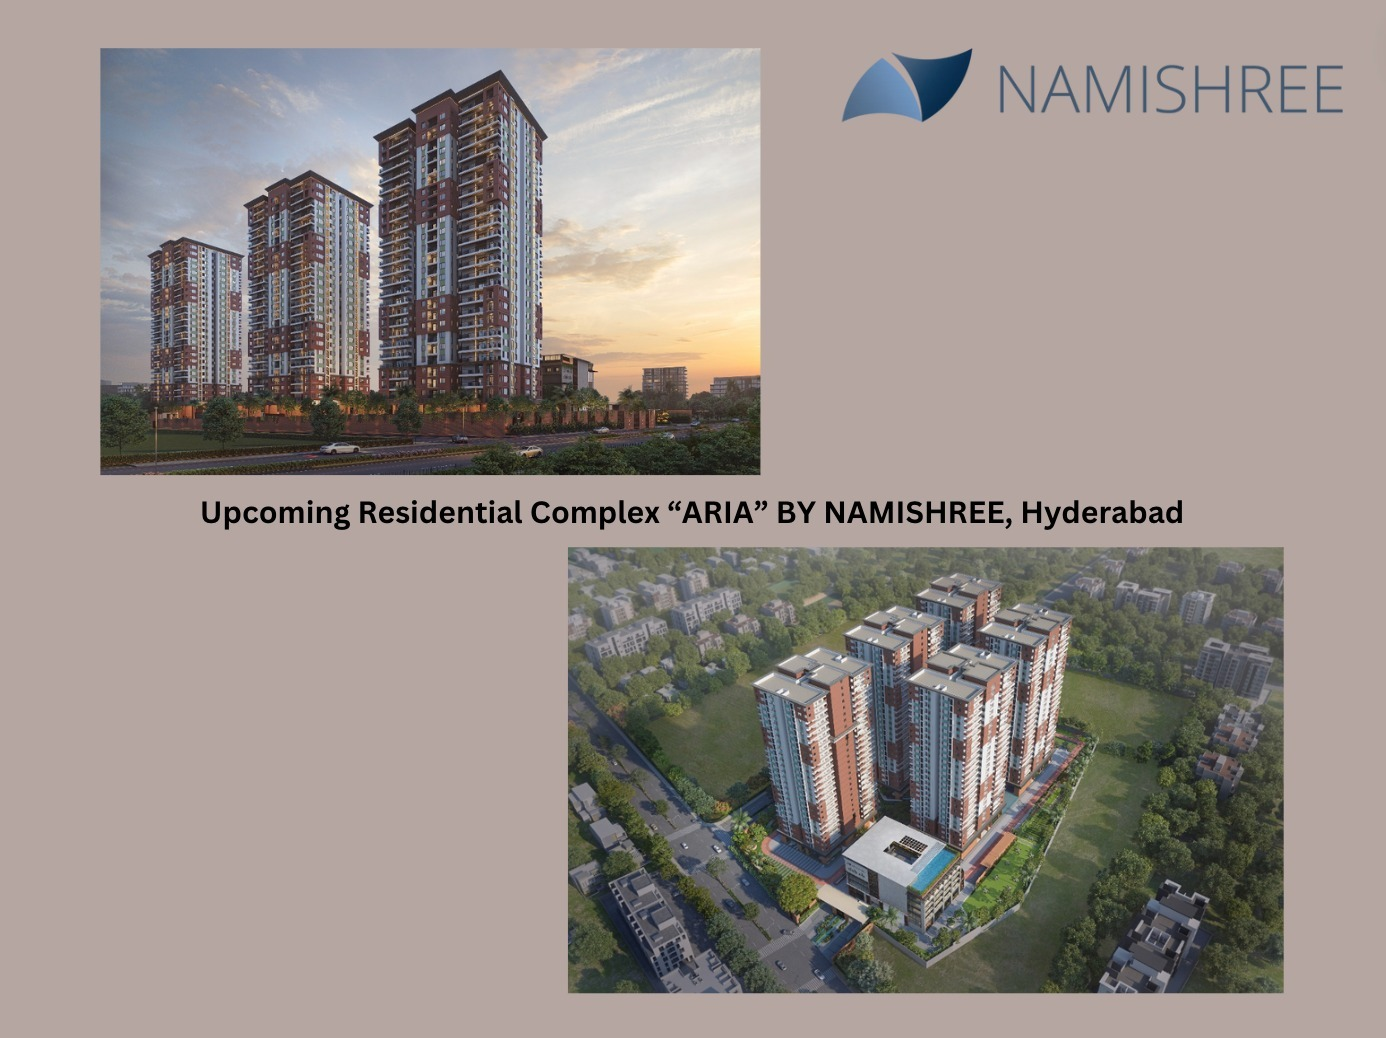 Upcoming Residential Project “ARIA” BY NAMISHREE, Hyderabad